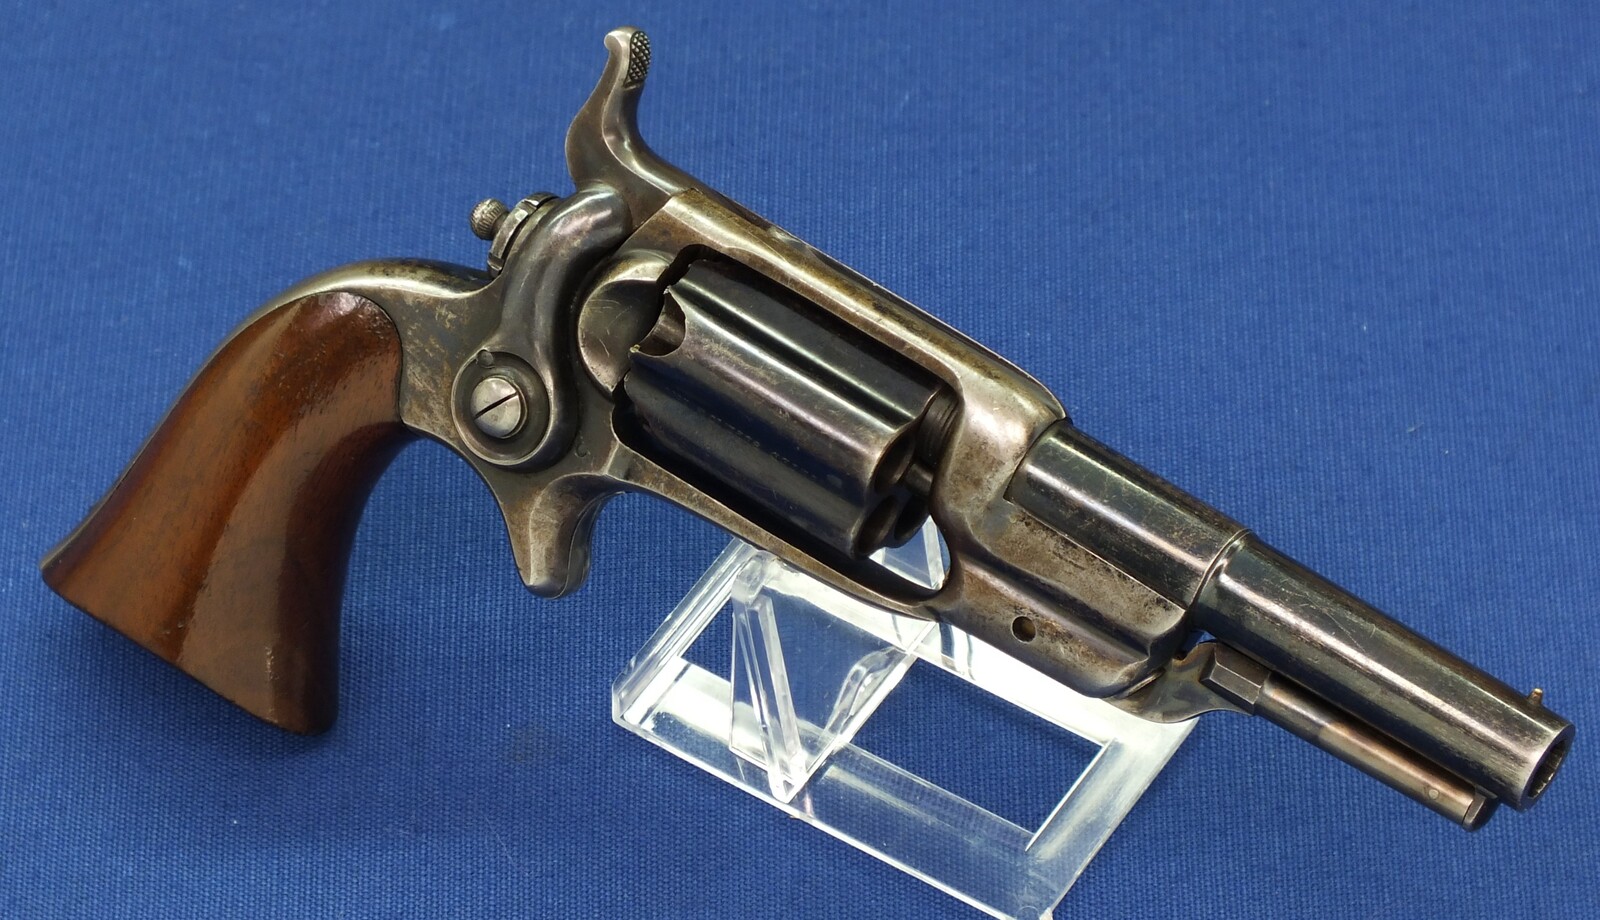 A fine antique Mahogany cased American Colt Model 1855 Root Model 5 Sidehammer Pocket Percussion Revolver. 5 shot Fluted Cylinder. 31 Caliber. 3,5 inch round barrel with New York address. In very good condition. Price 4.450 euro.